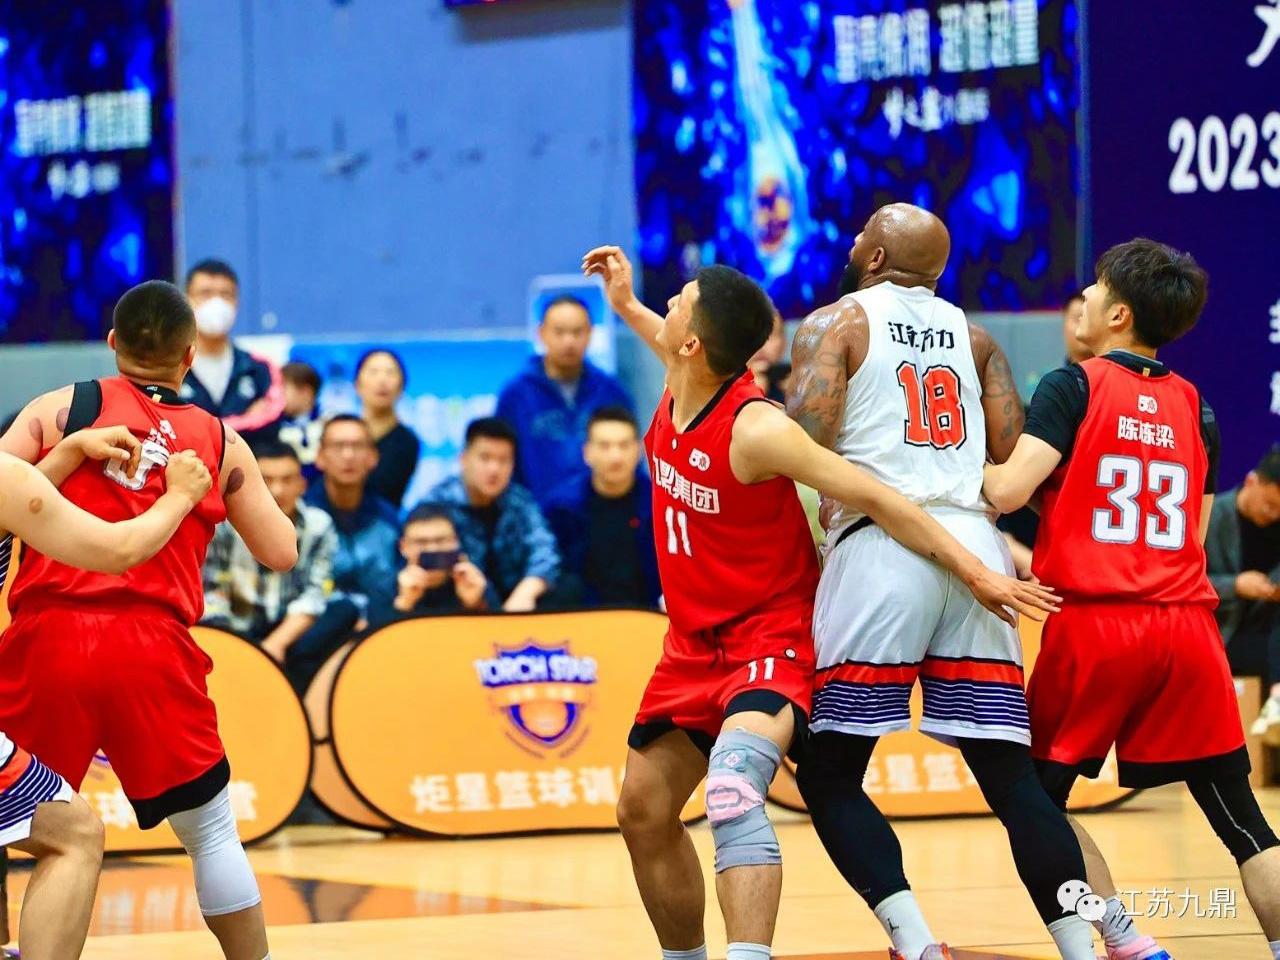 Jiuding Group basketball team won the runner-up of the “Dream Blue” Cup